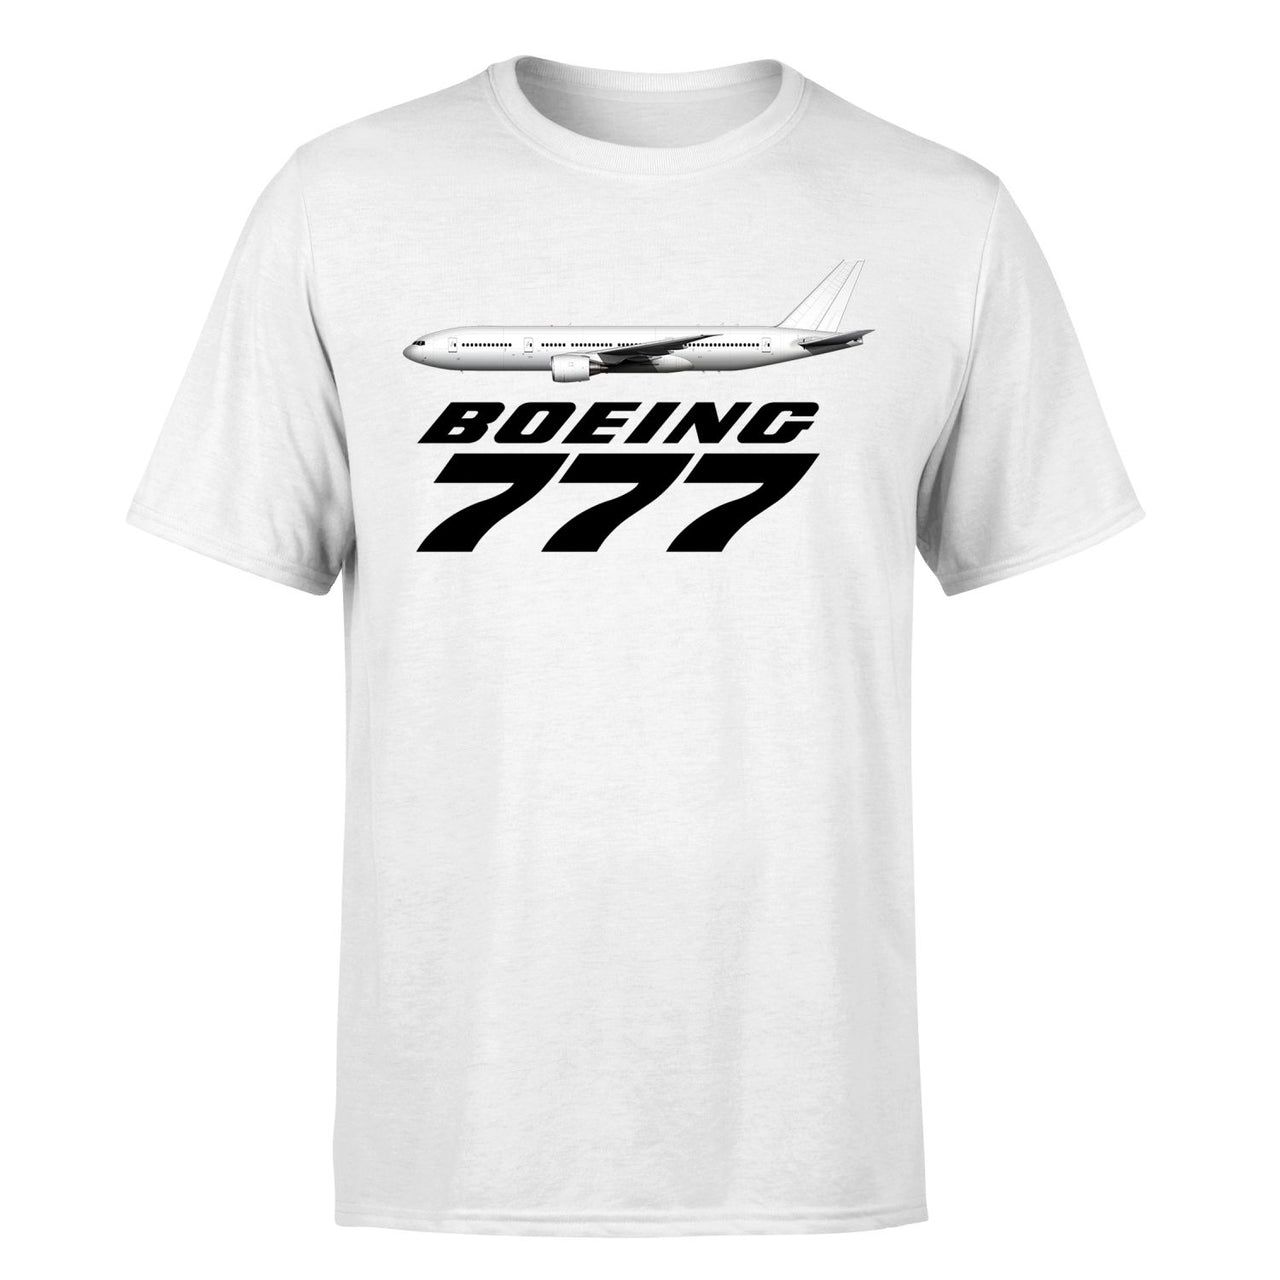 The Boeing 777 Designed T-Shirts